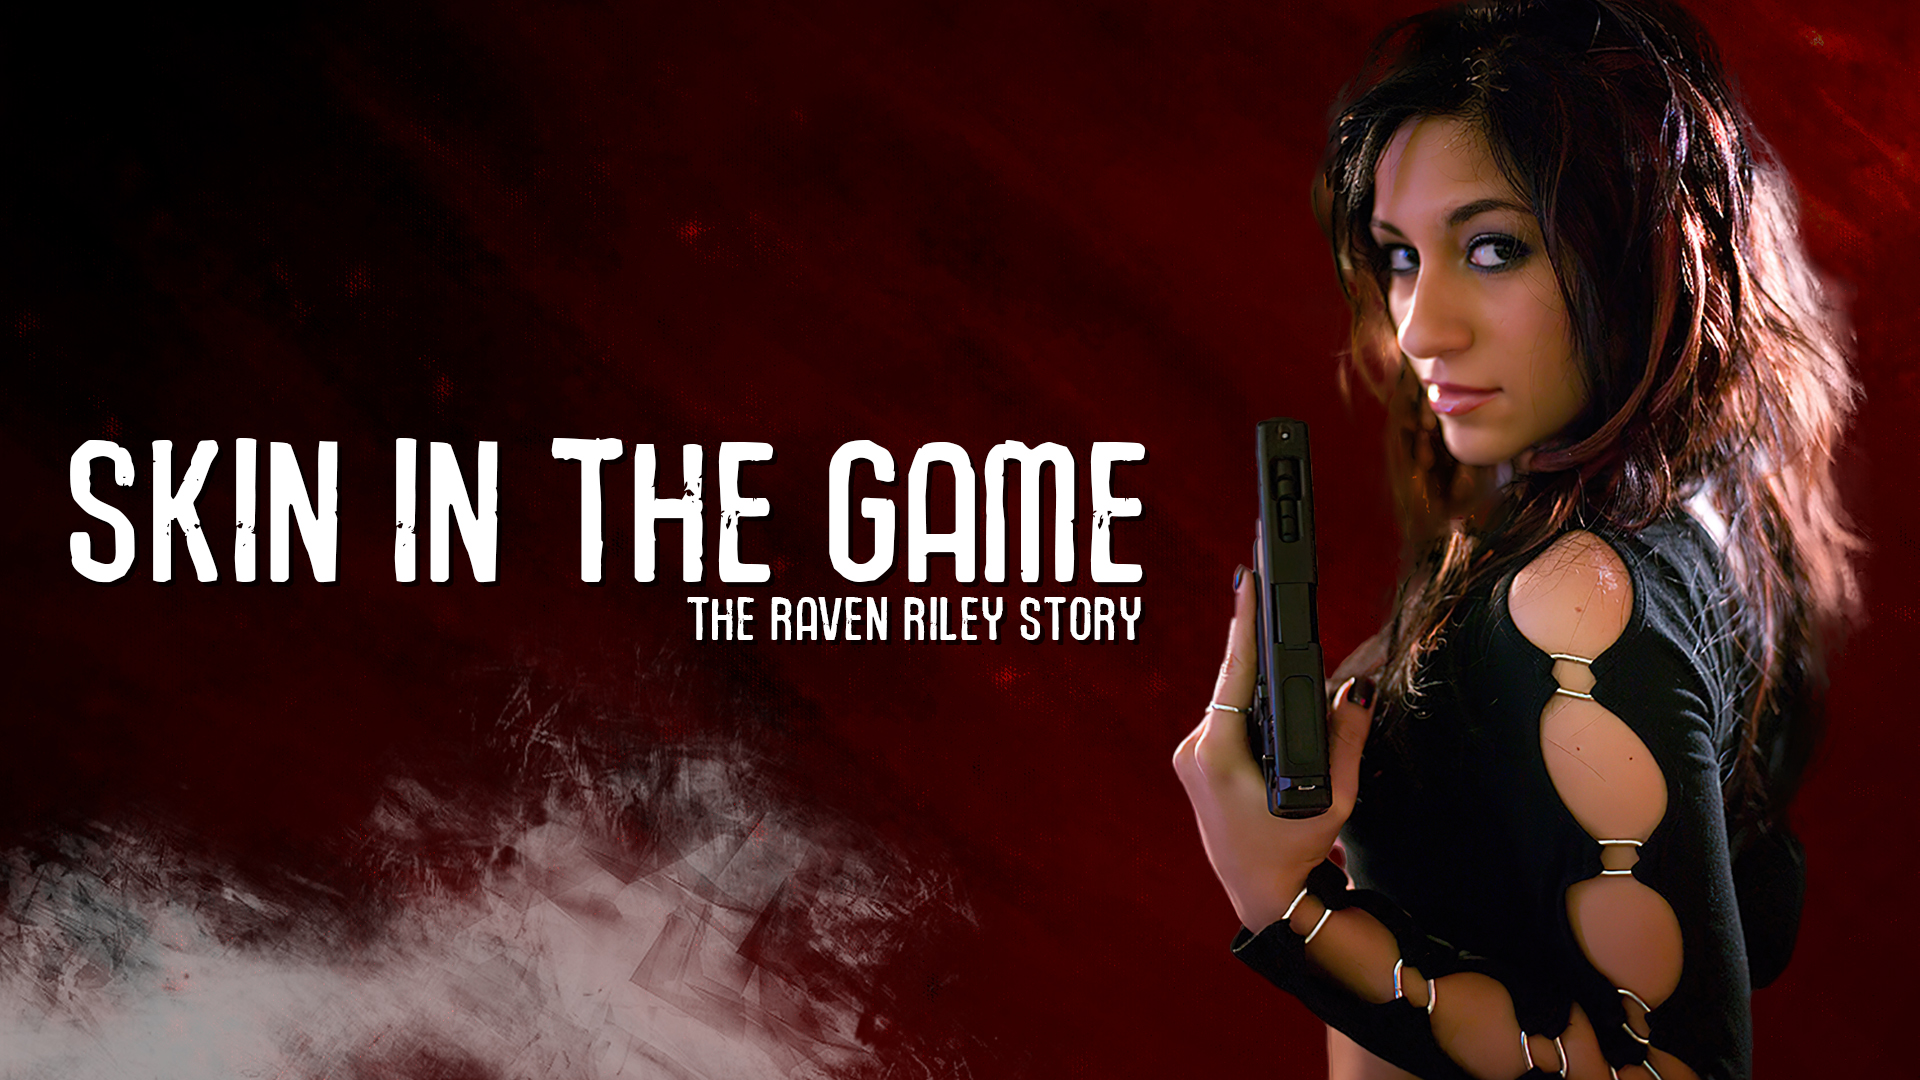 “Skin In The Game – The Raven Riley Story” by David Pilot Released